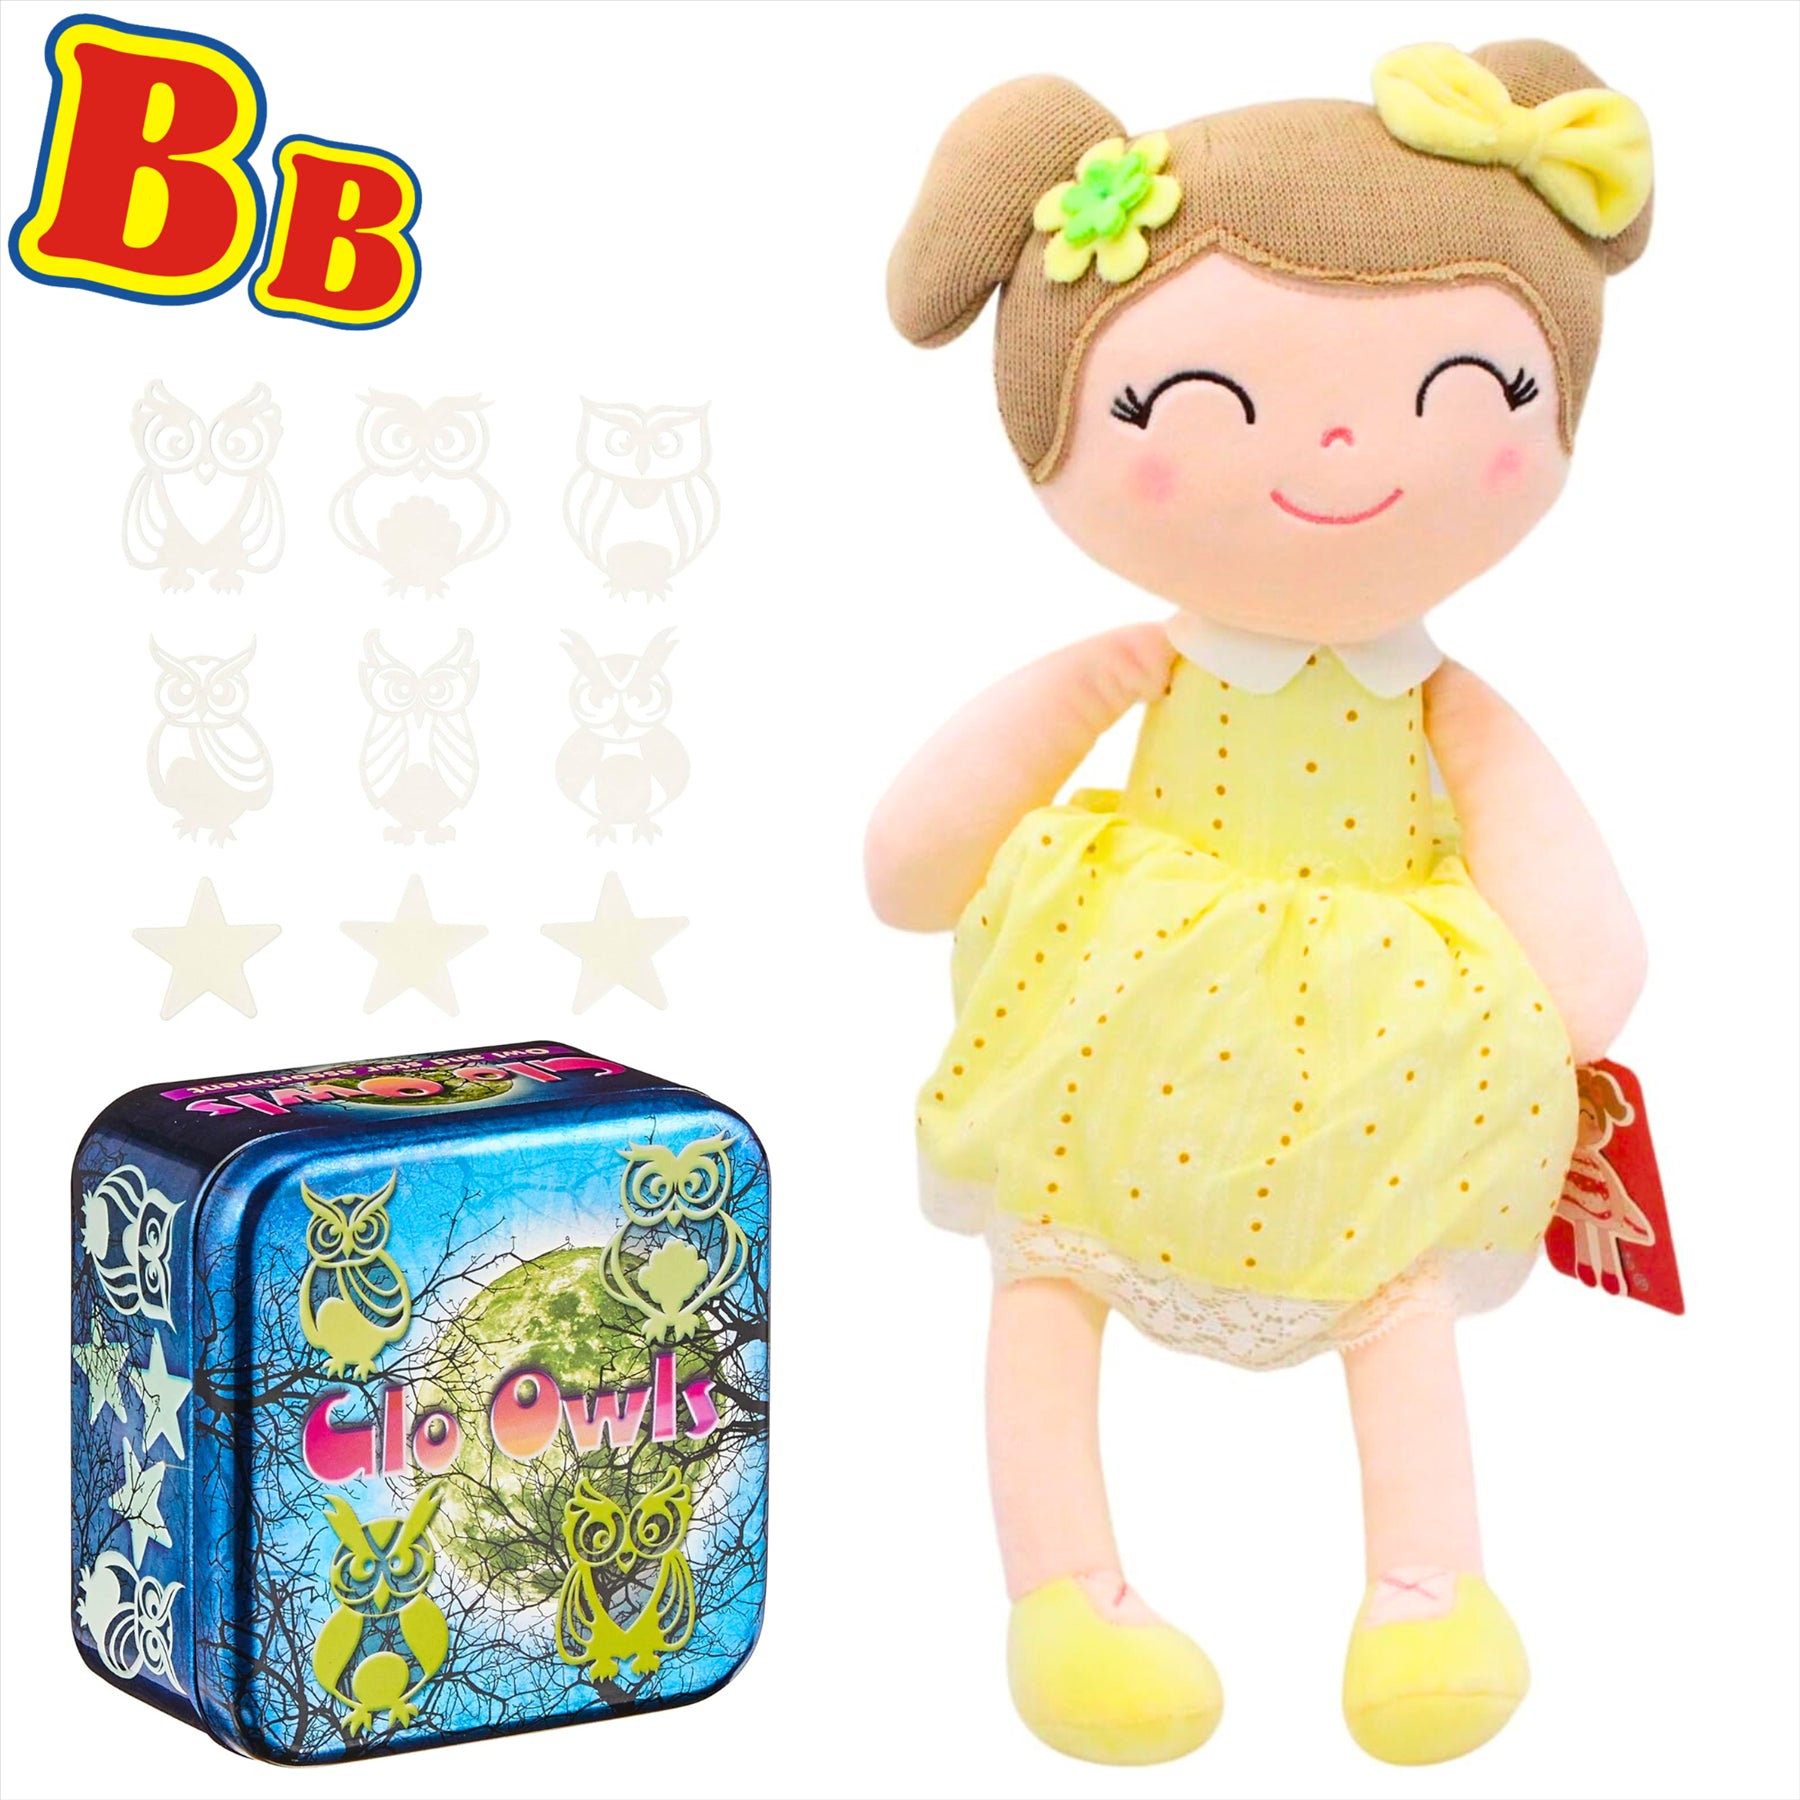 Gloveleya Super Soft Embroidered Yellow Daisy 40cm Plush Doll with 42 Glow in the Dark Owls and Stars